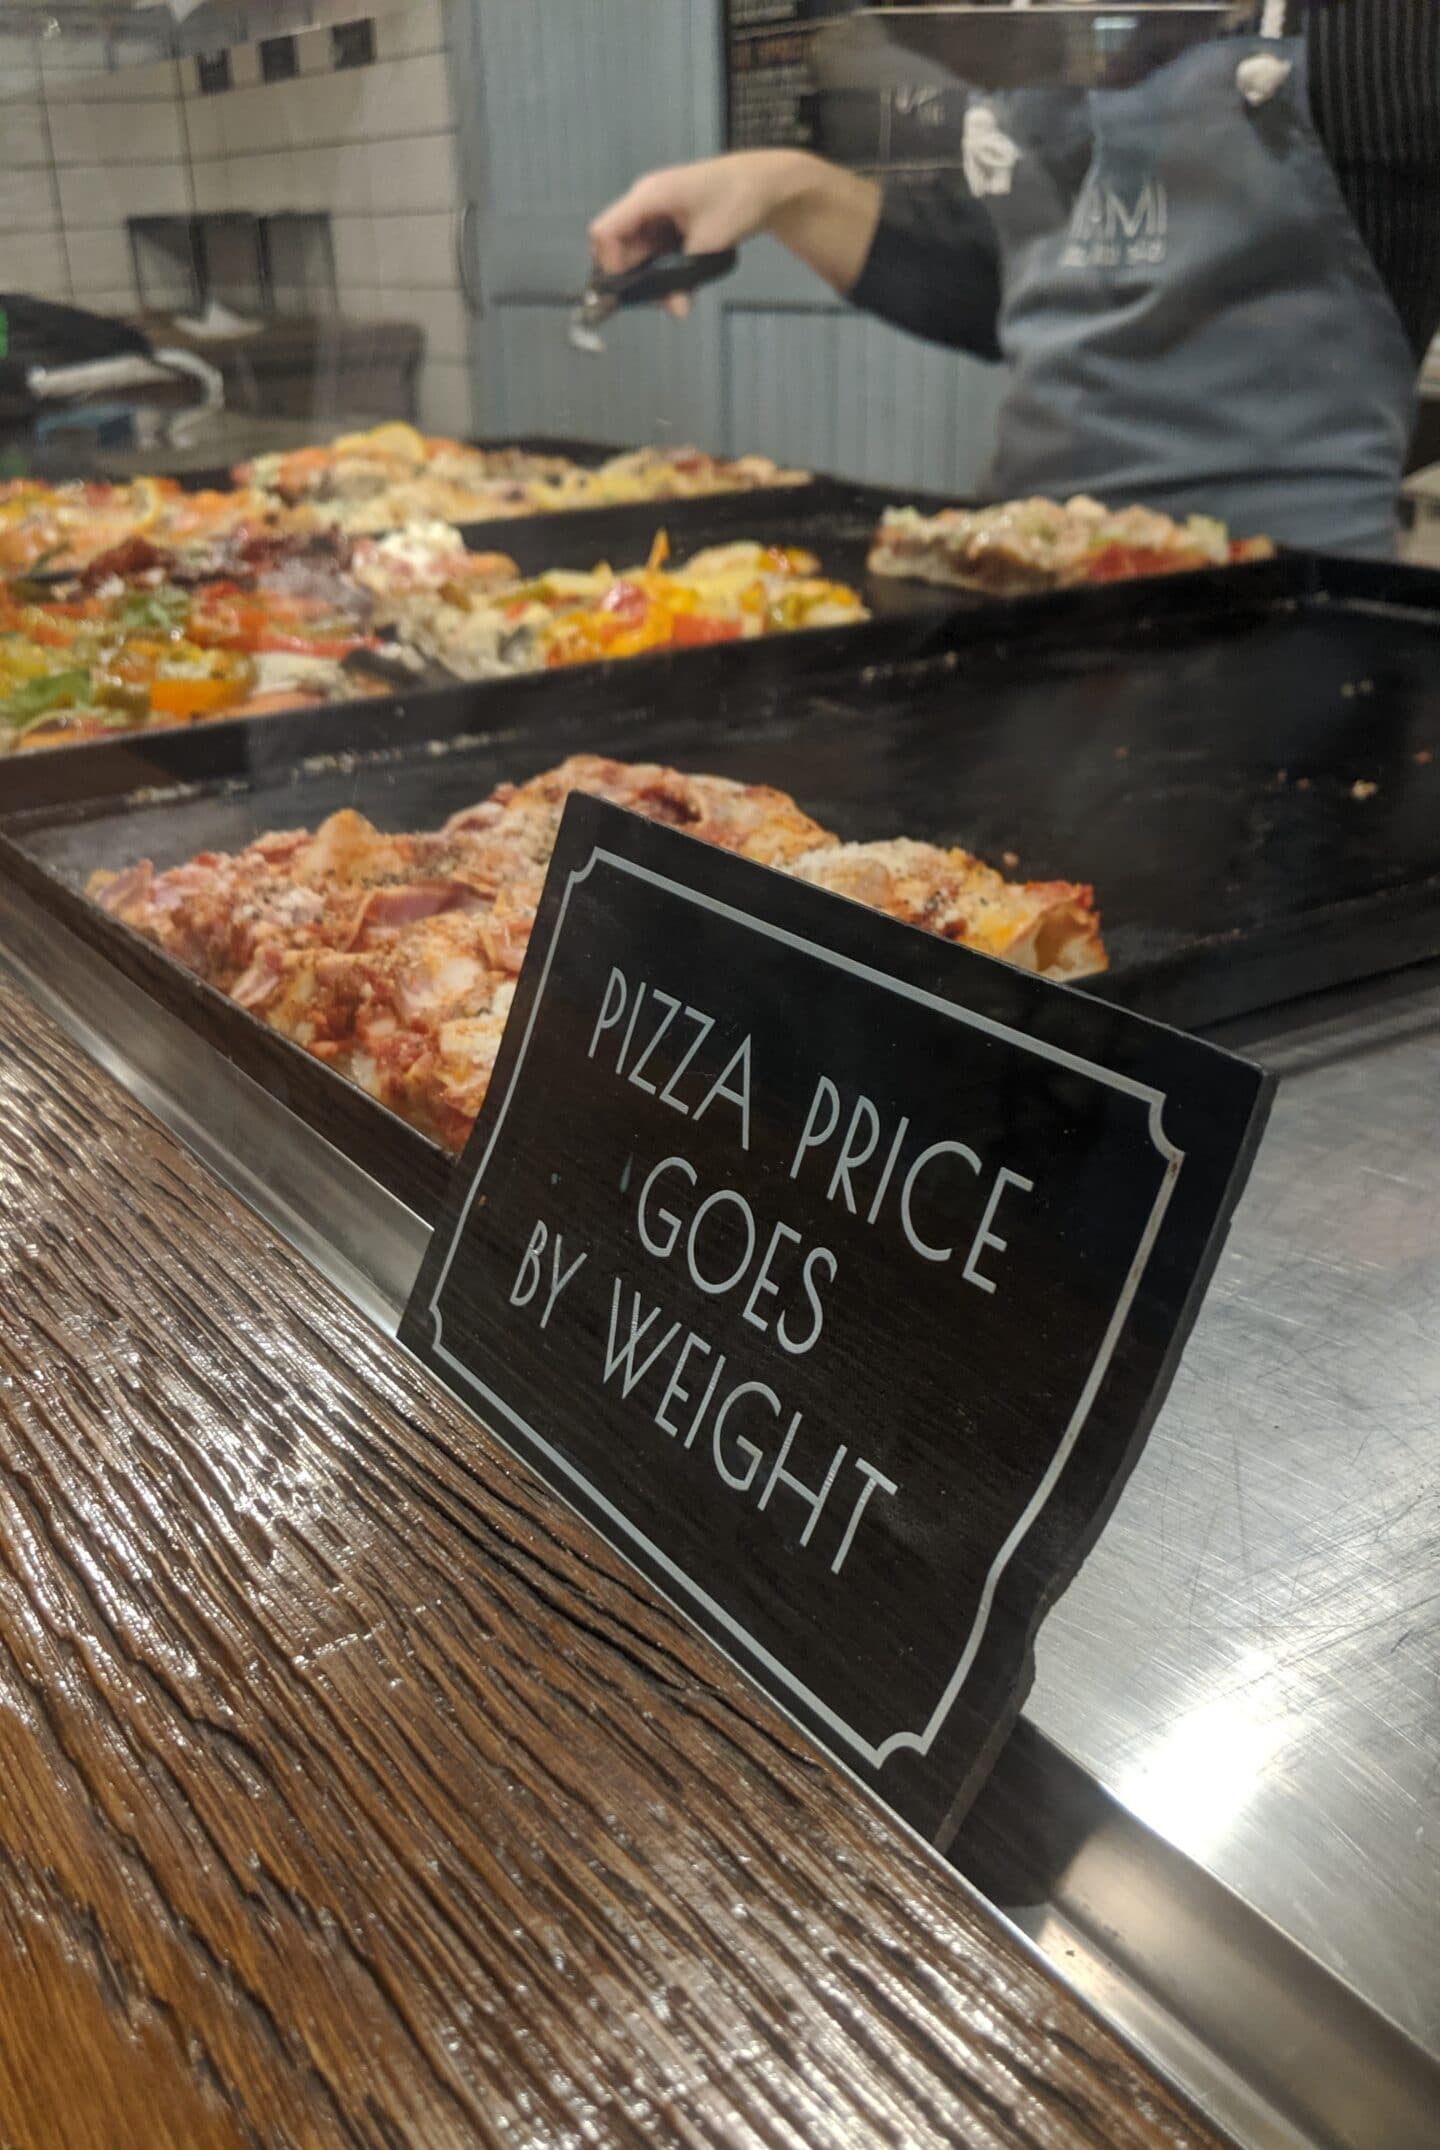 Pizza sold by weight